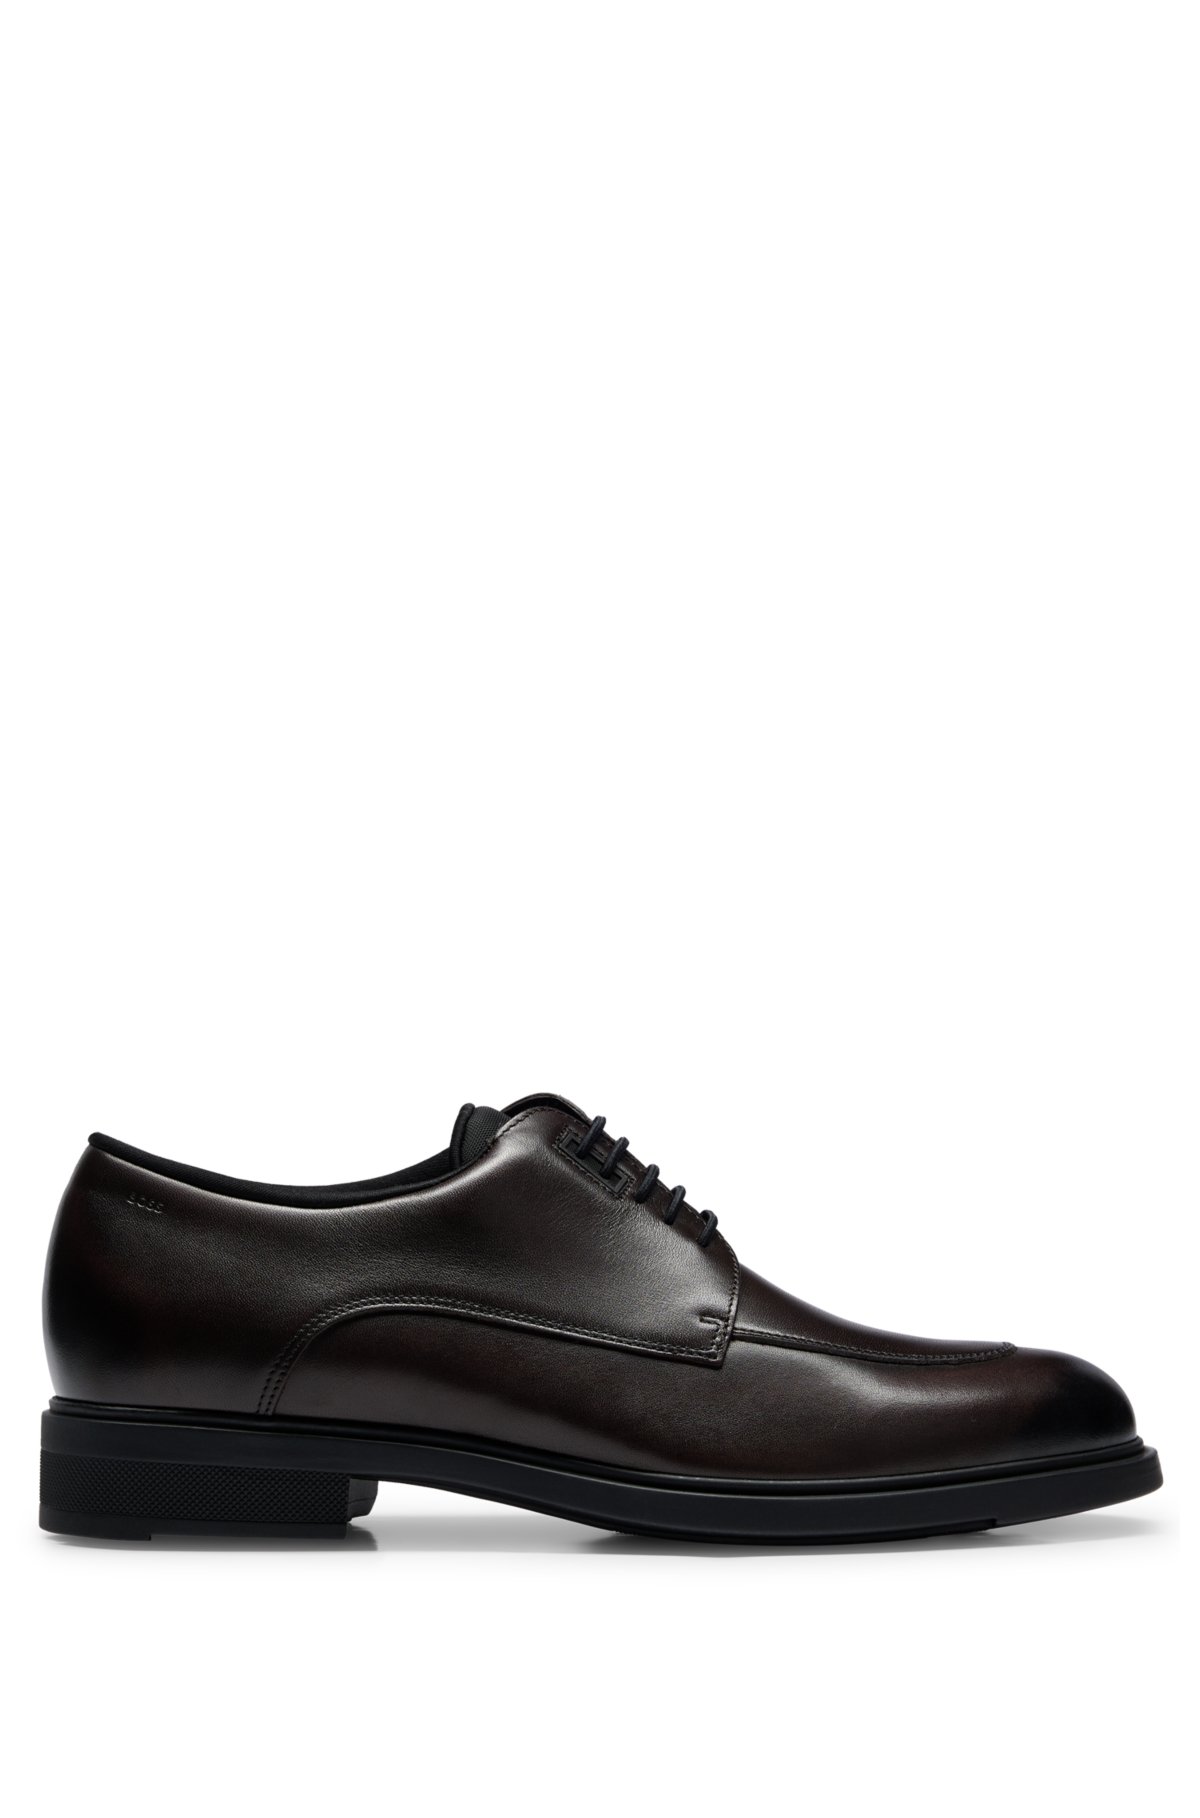 BOSS Tanned-leather Derby shoes with cosy lining